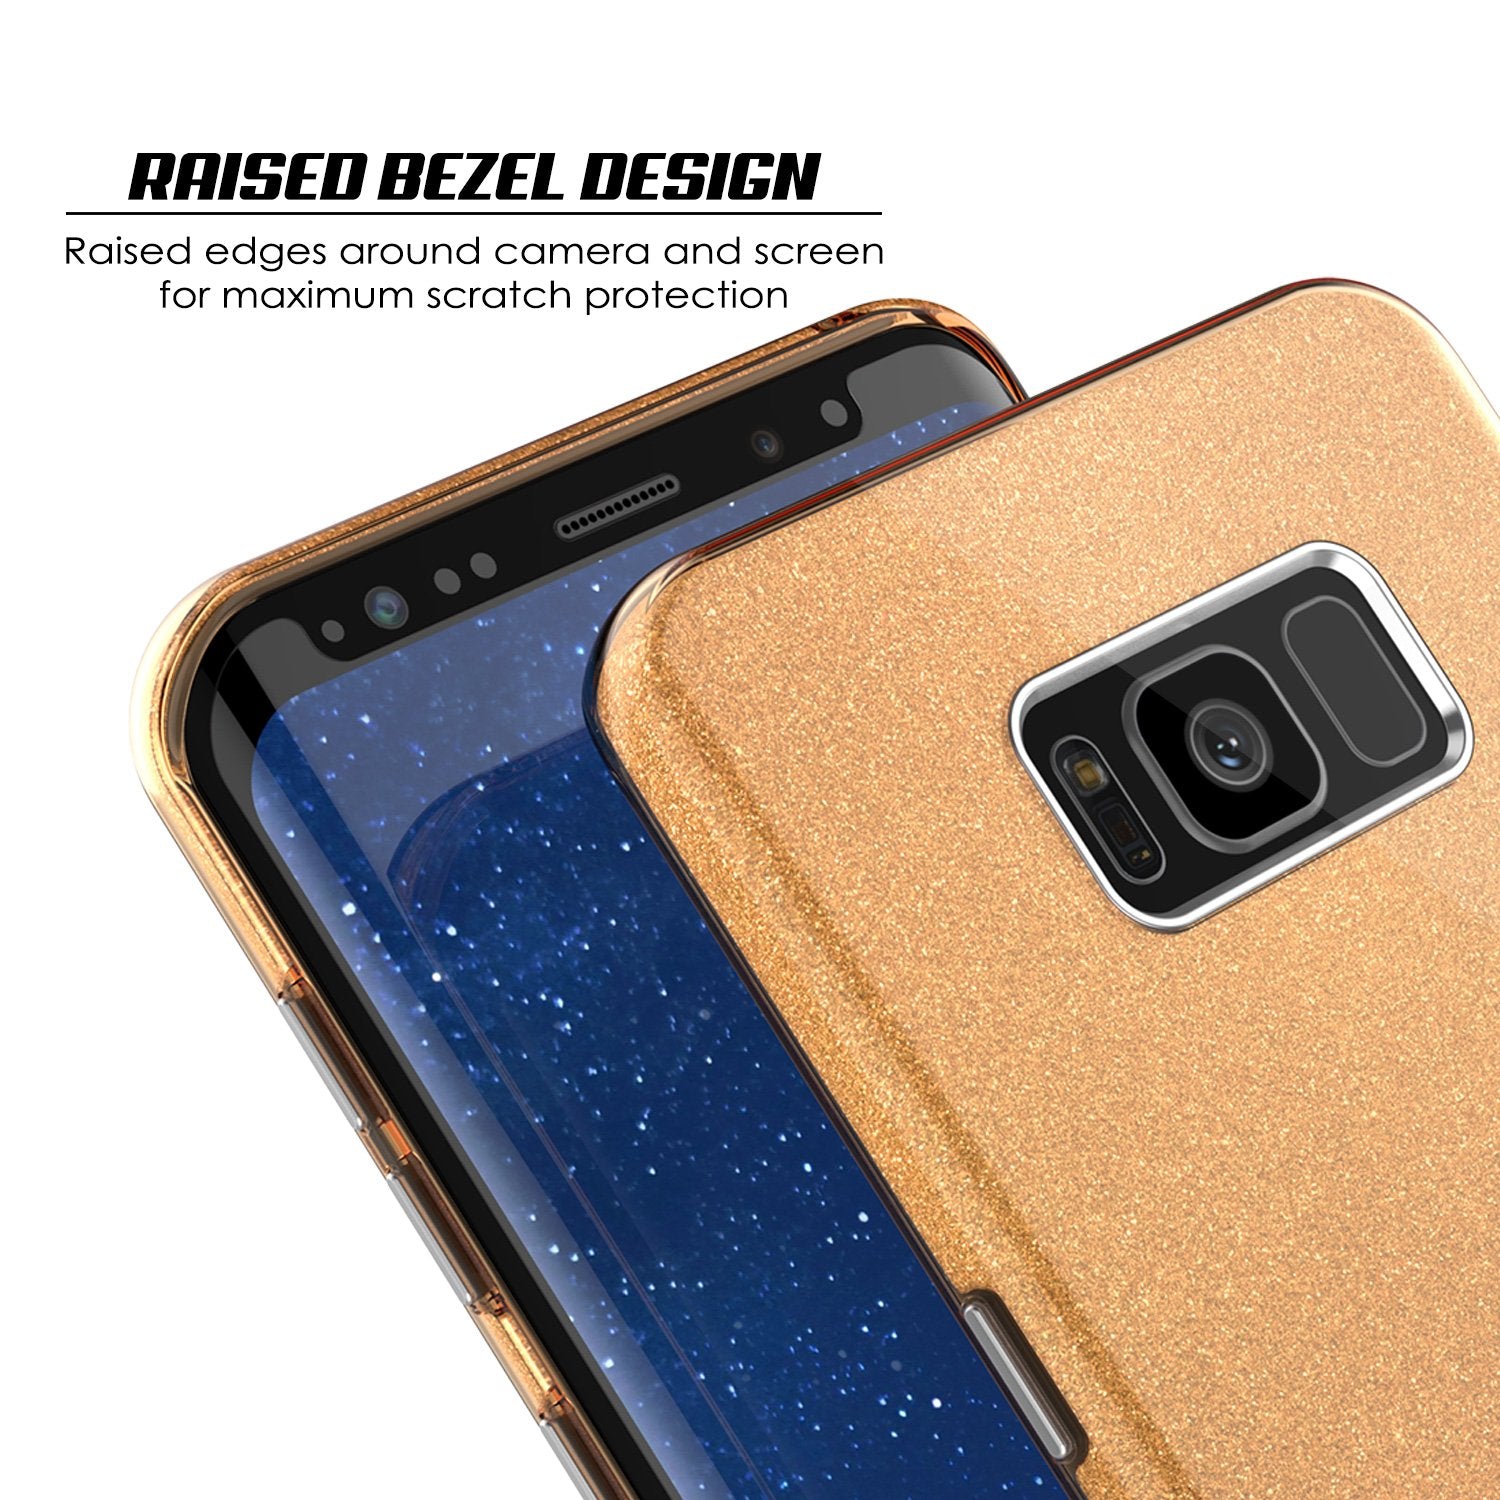 Galaxy S8 Case, Punkcase Galactic 2.0 Series Ultra Slim Protective Armor TPU Cover w/ PunkShield Screen Protector | Lifetime Exchange Warranty | Designed for Samsung Galaxy S8 [Gold] - PunkCase NZ